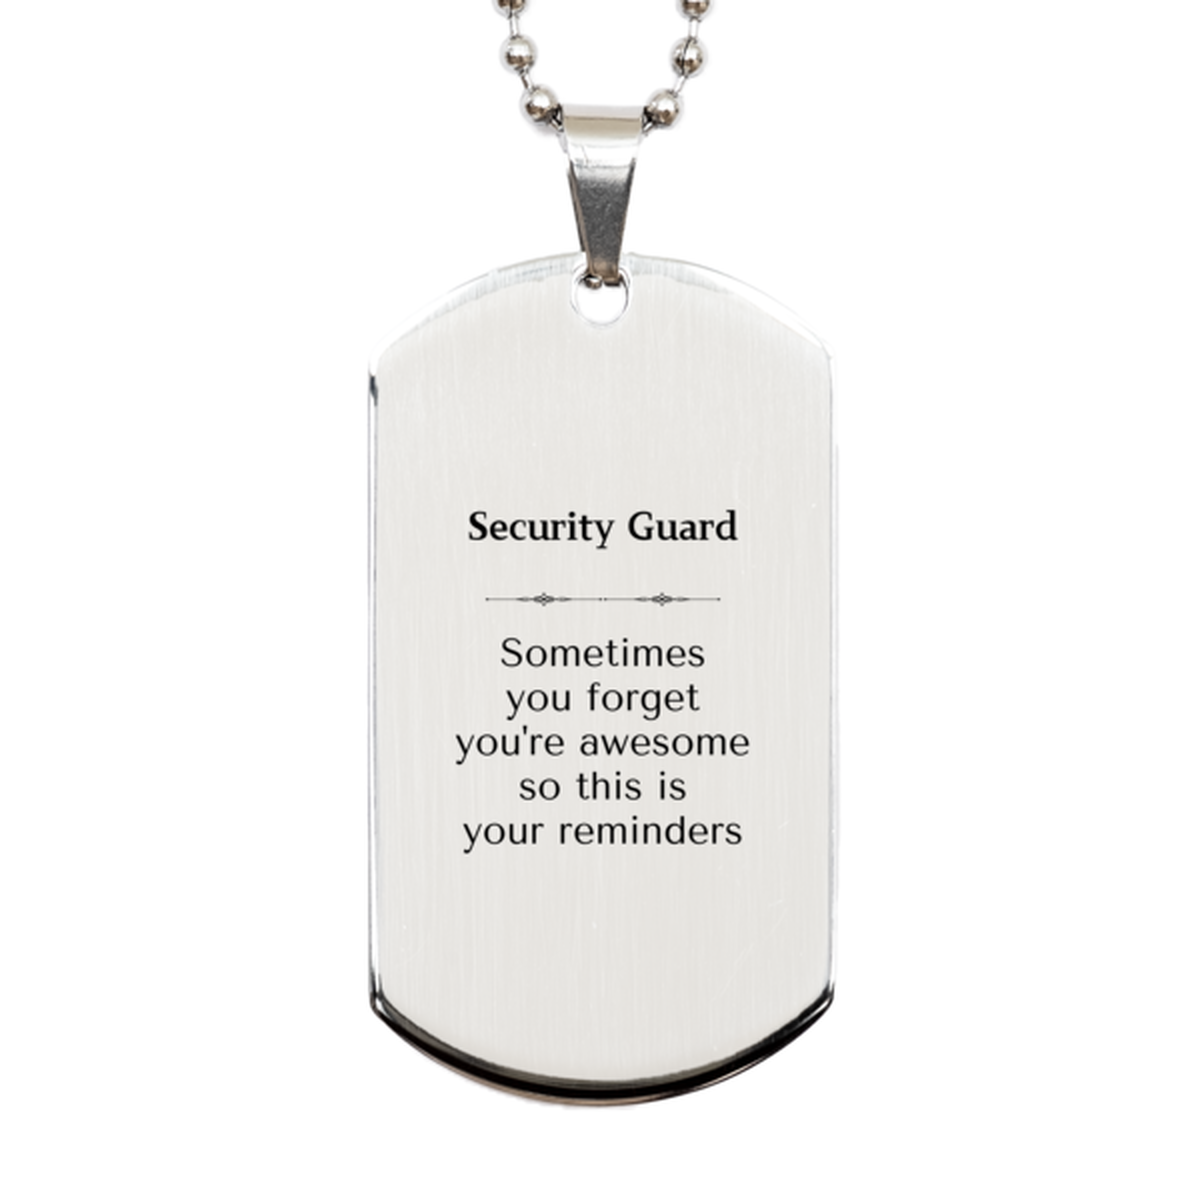 Sentimental Security Guard Silver Dog Tag, Security Guard Sometimes you forget you're awesome so this is your reminders, Graduation Christmas Birthday Gifts for Security Guard, Men, Women, Coworkers